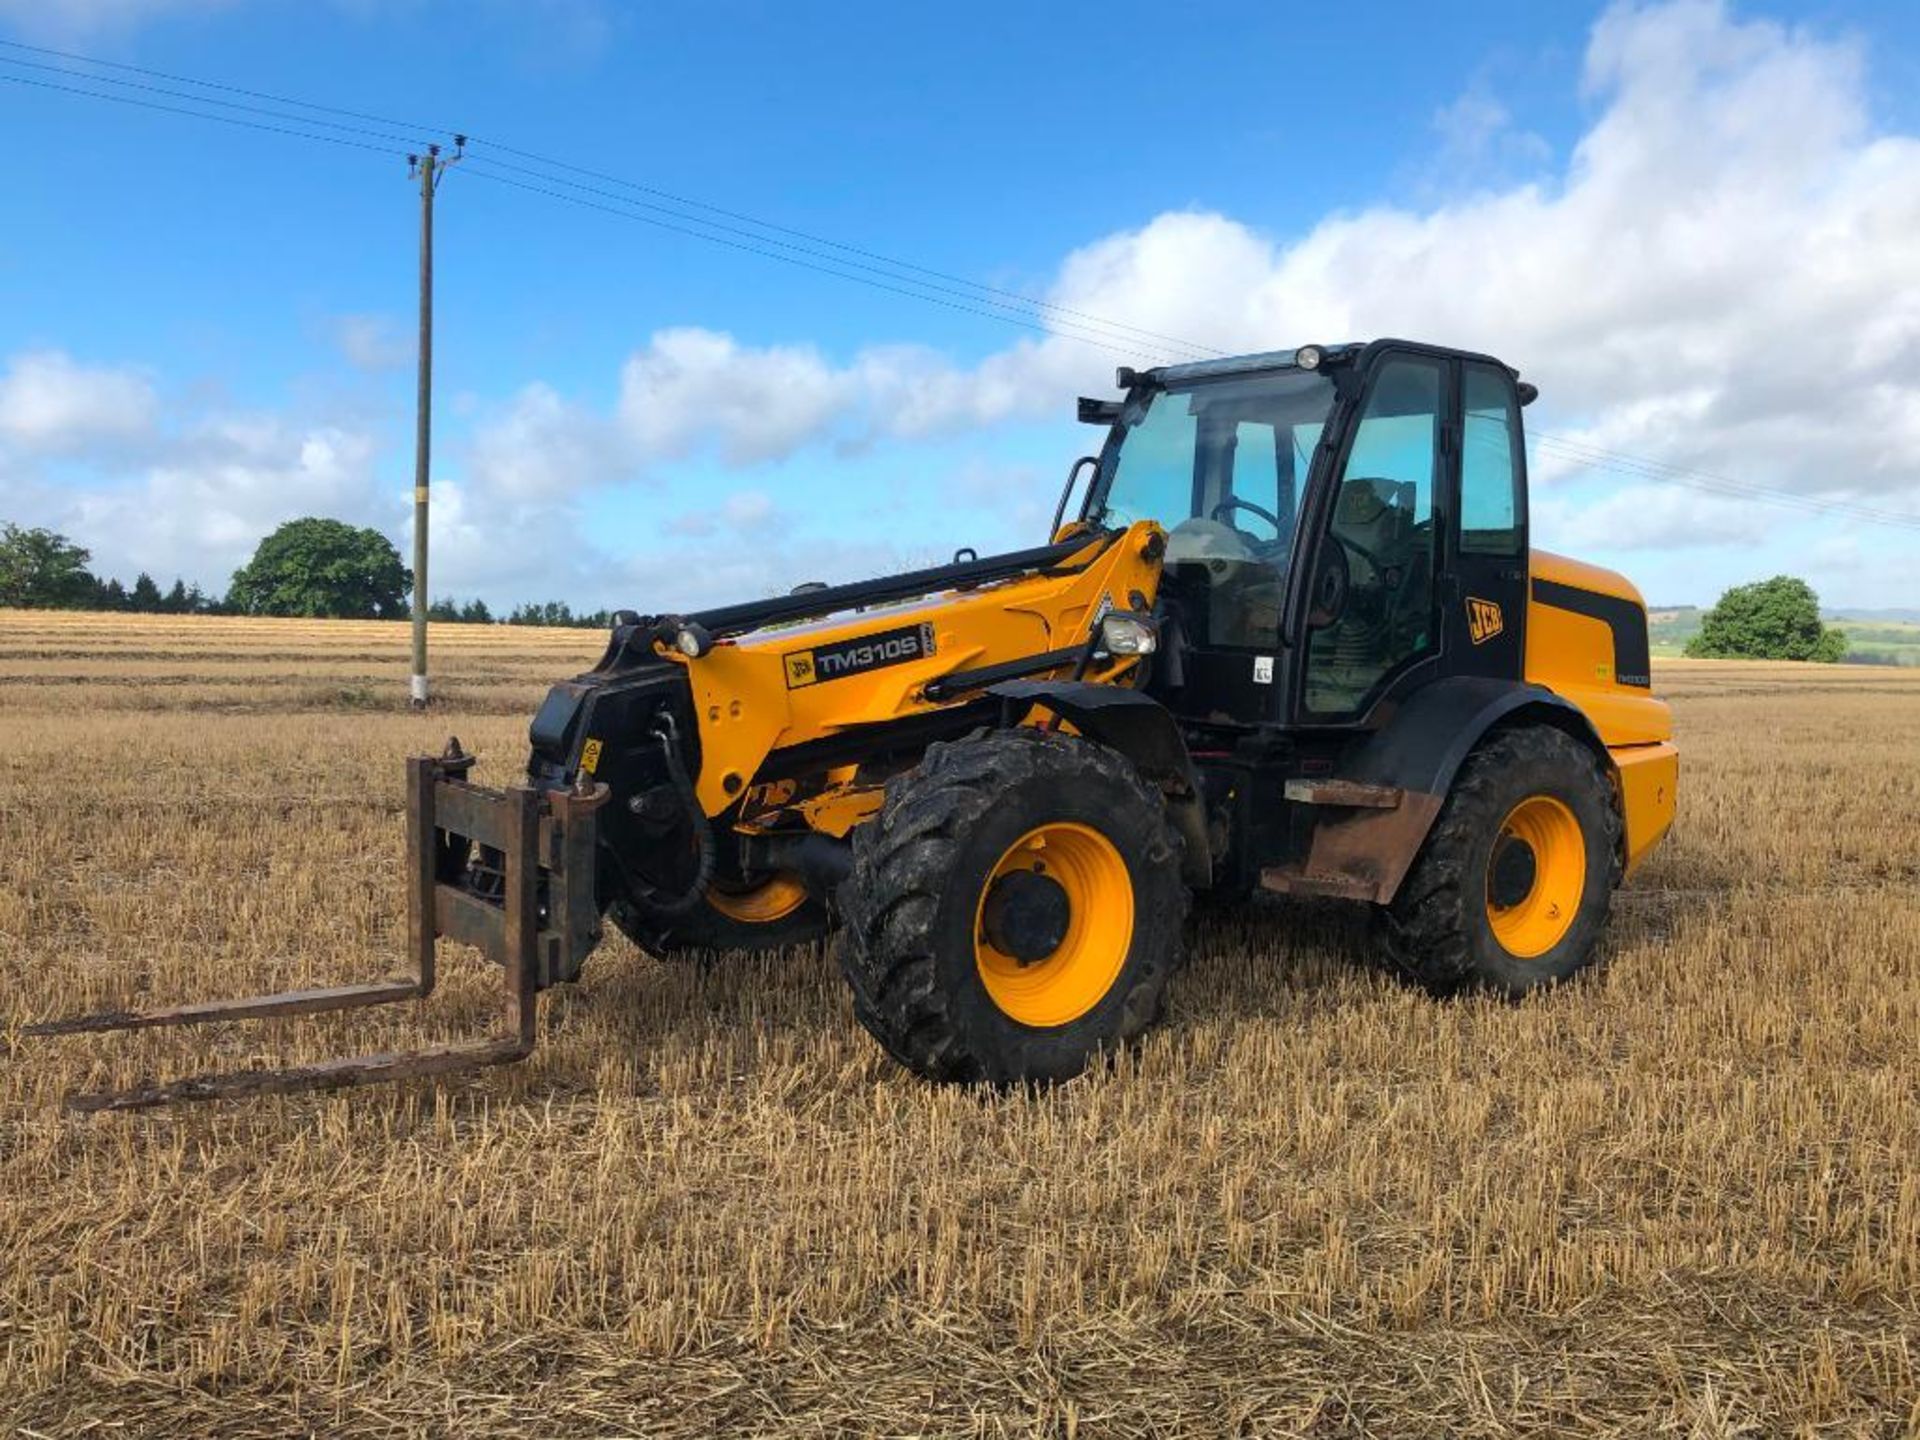 2010 JCB TM310S Agri pivot steer materials handler on 460/70R42 wheels and tyres with pallet tines, - Image 13 of 15